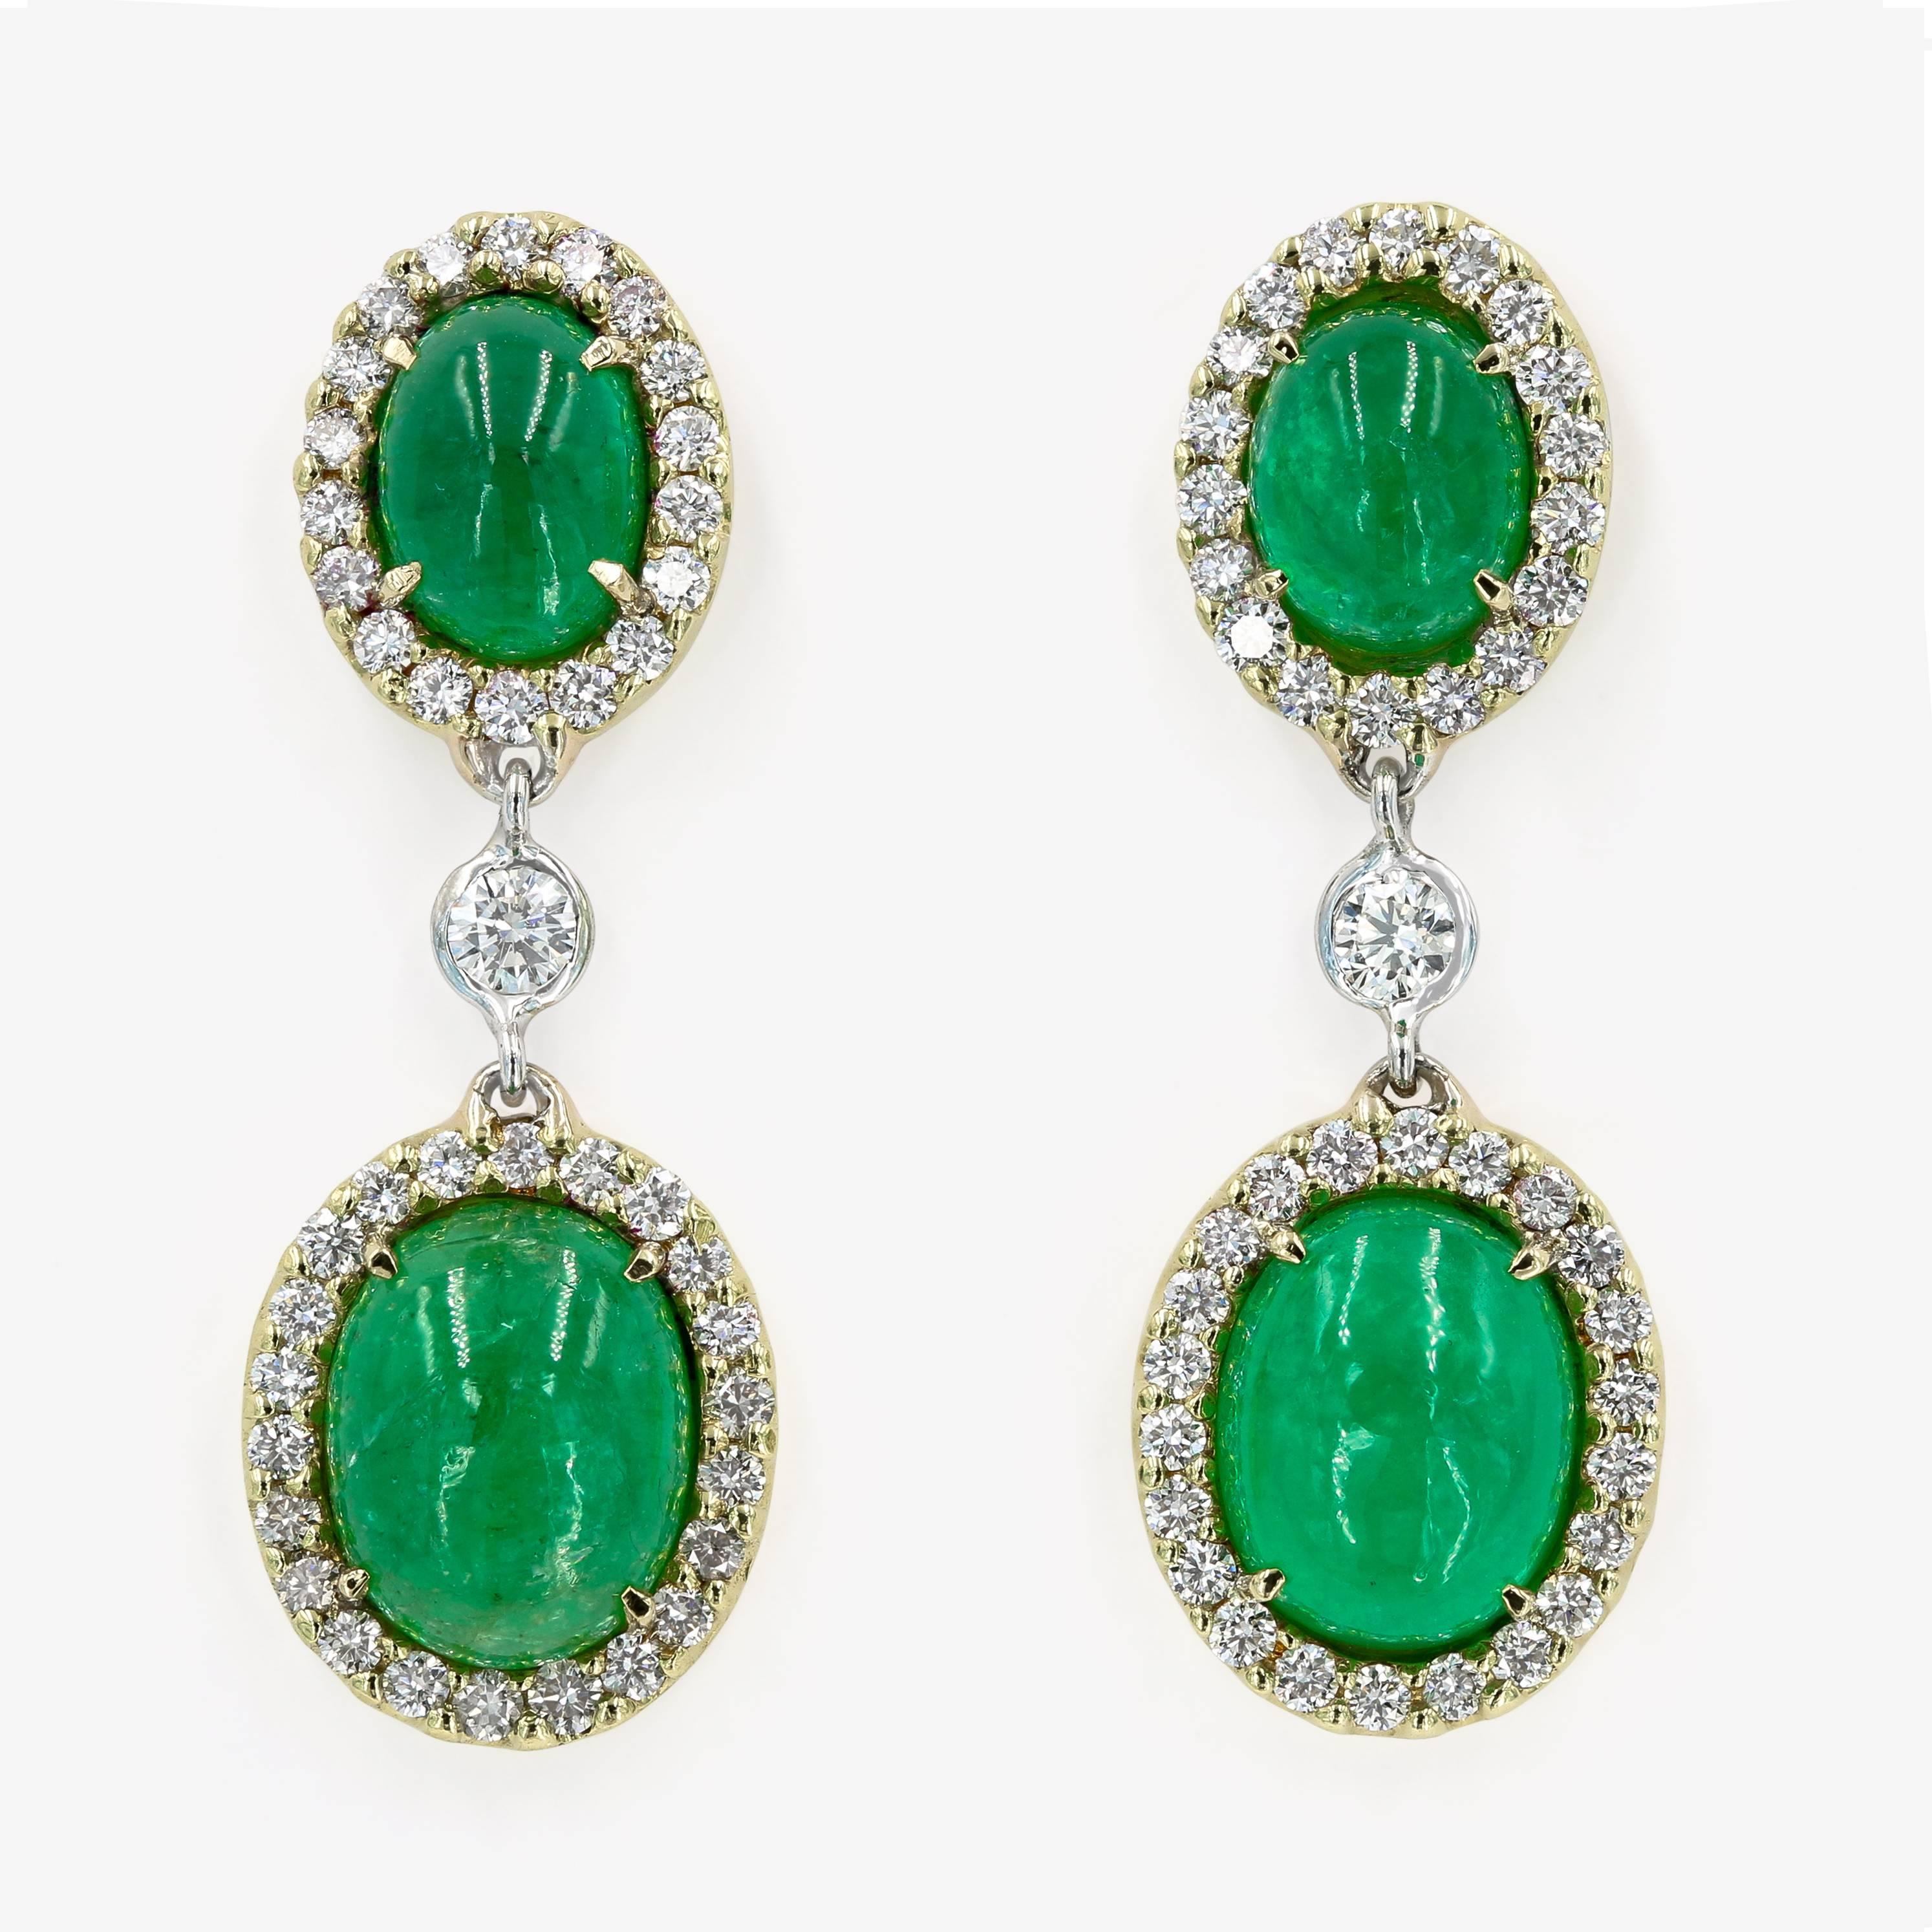 These custom crafted original earrings are set in 18kt. yellow gold with 4 oval shaped cabochon cut emeralds: 2 emerald cabochons=6.09cts. t.w. and 2 emerald cabochons=3.25cts. t.w. The emeralds are surrounded by 82 ideal cut round diamonds=1.36ct.